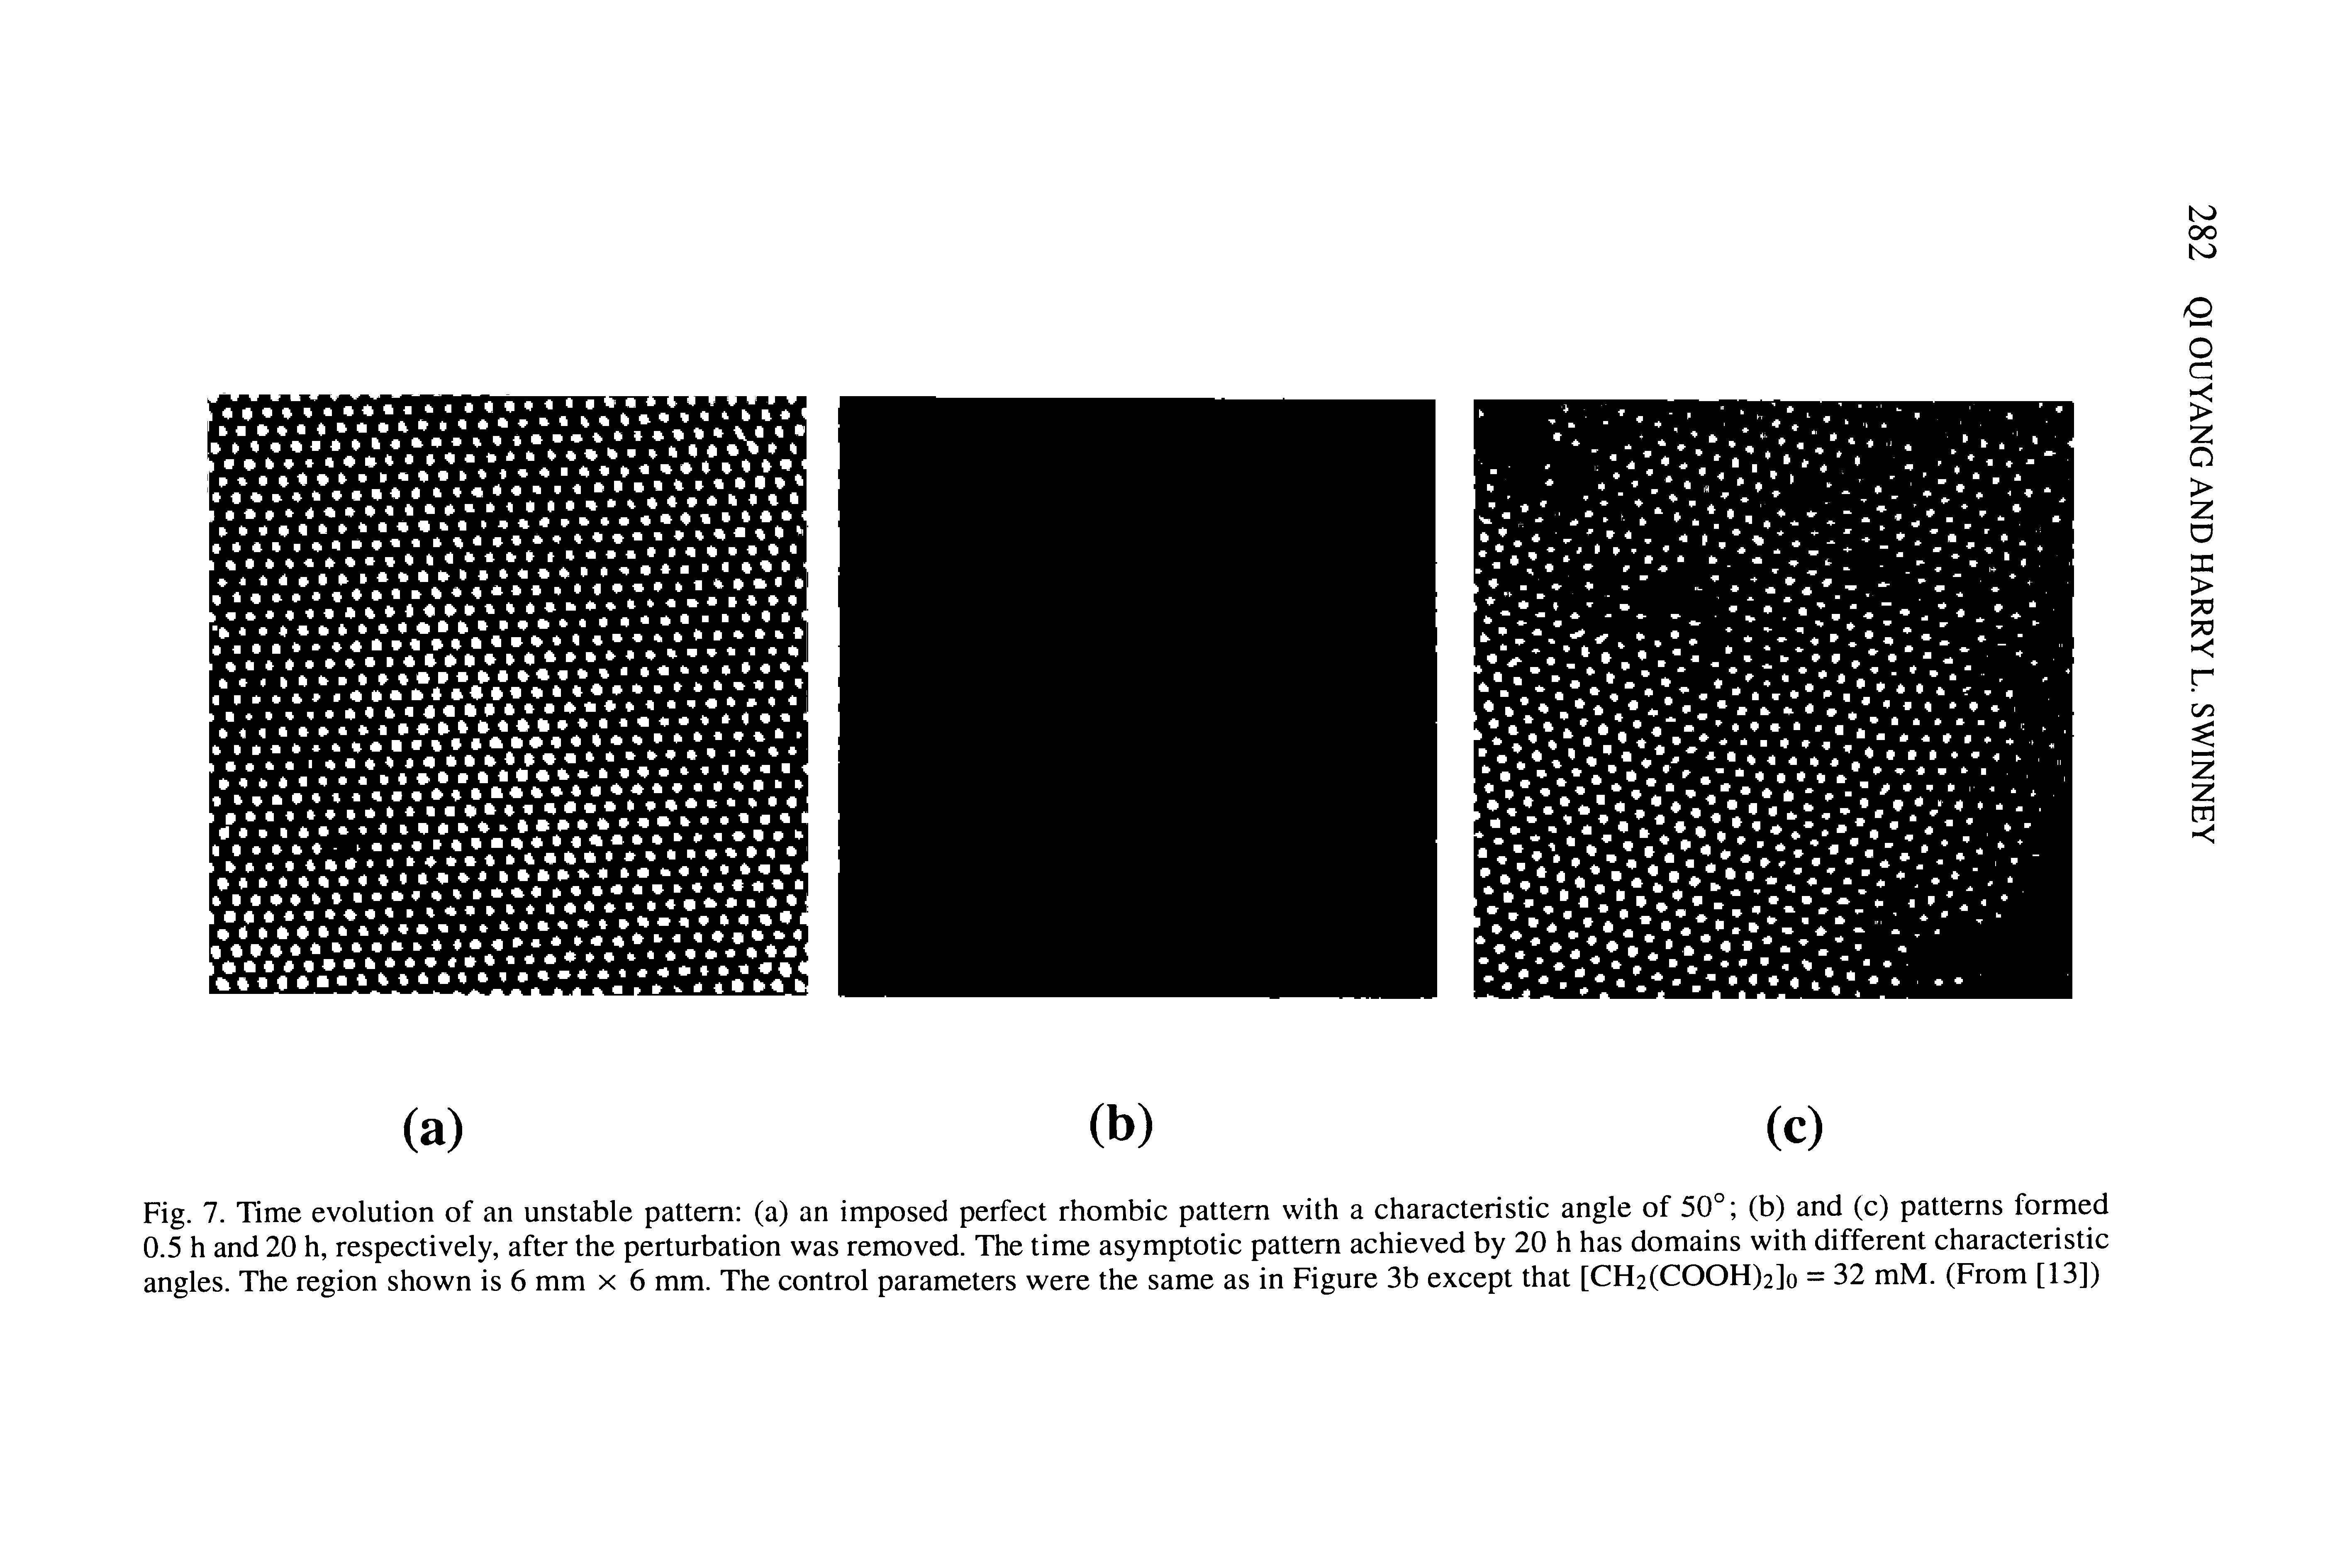 Fig. 7. Time evolution of an unstable pattern (a) an imposed perfect rhombic pattern with a characteristic angle of 50° (b) and (c) patterns formed 0.5 h and 20 h, respectively, after the perturbation was removed. The time asymptotic pattern achieved by 20 h has domains with different characteristic angles. The region shown is 6 mm x 6 mm. The control parameters were the same as in Figure 3b except that [CH2(COOH)2]o = 32 mM. (From [13])...